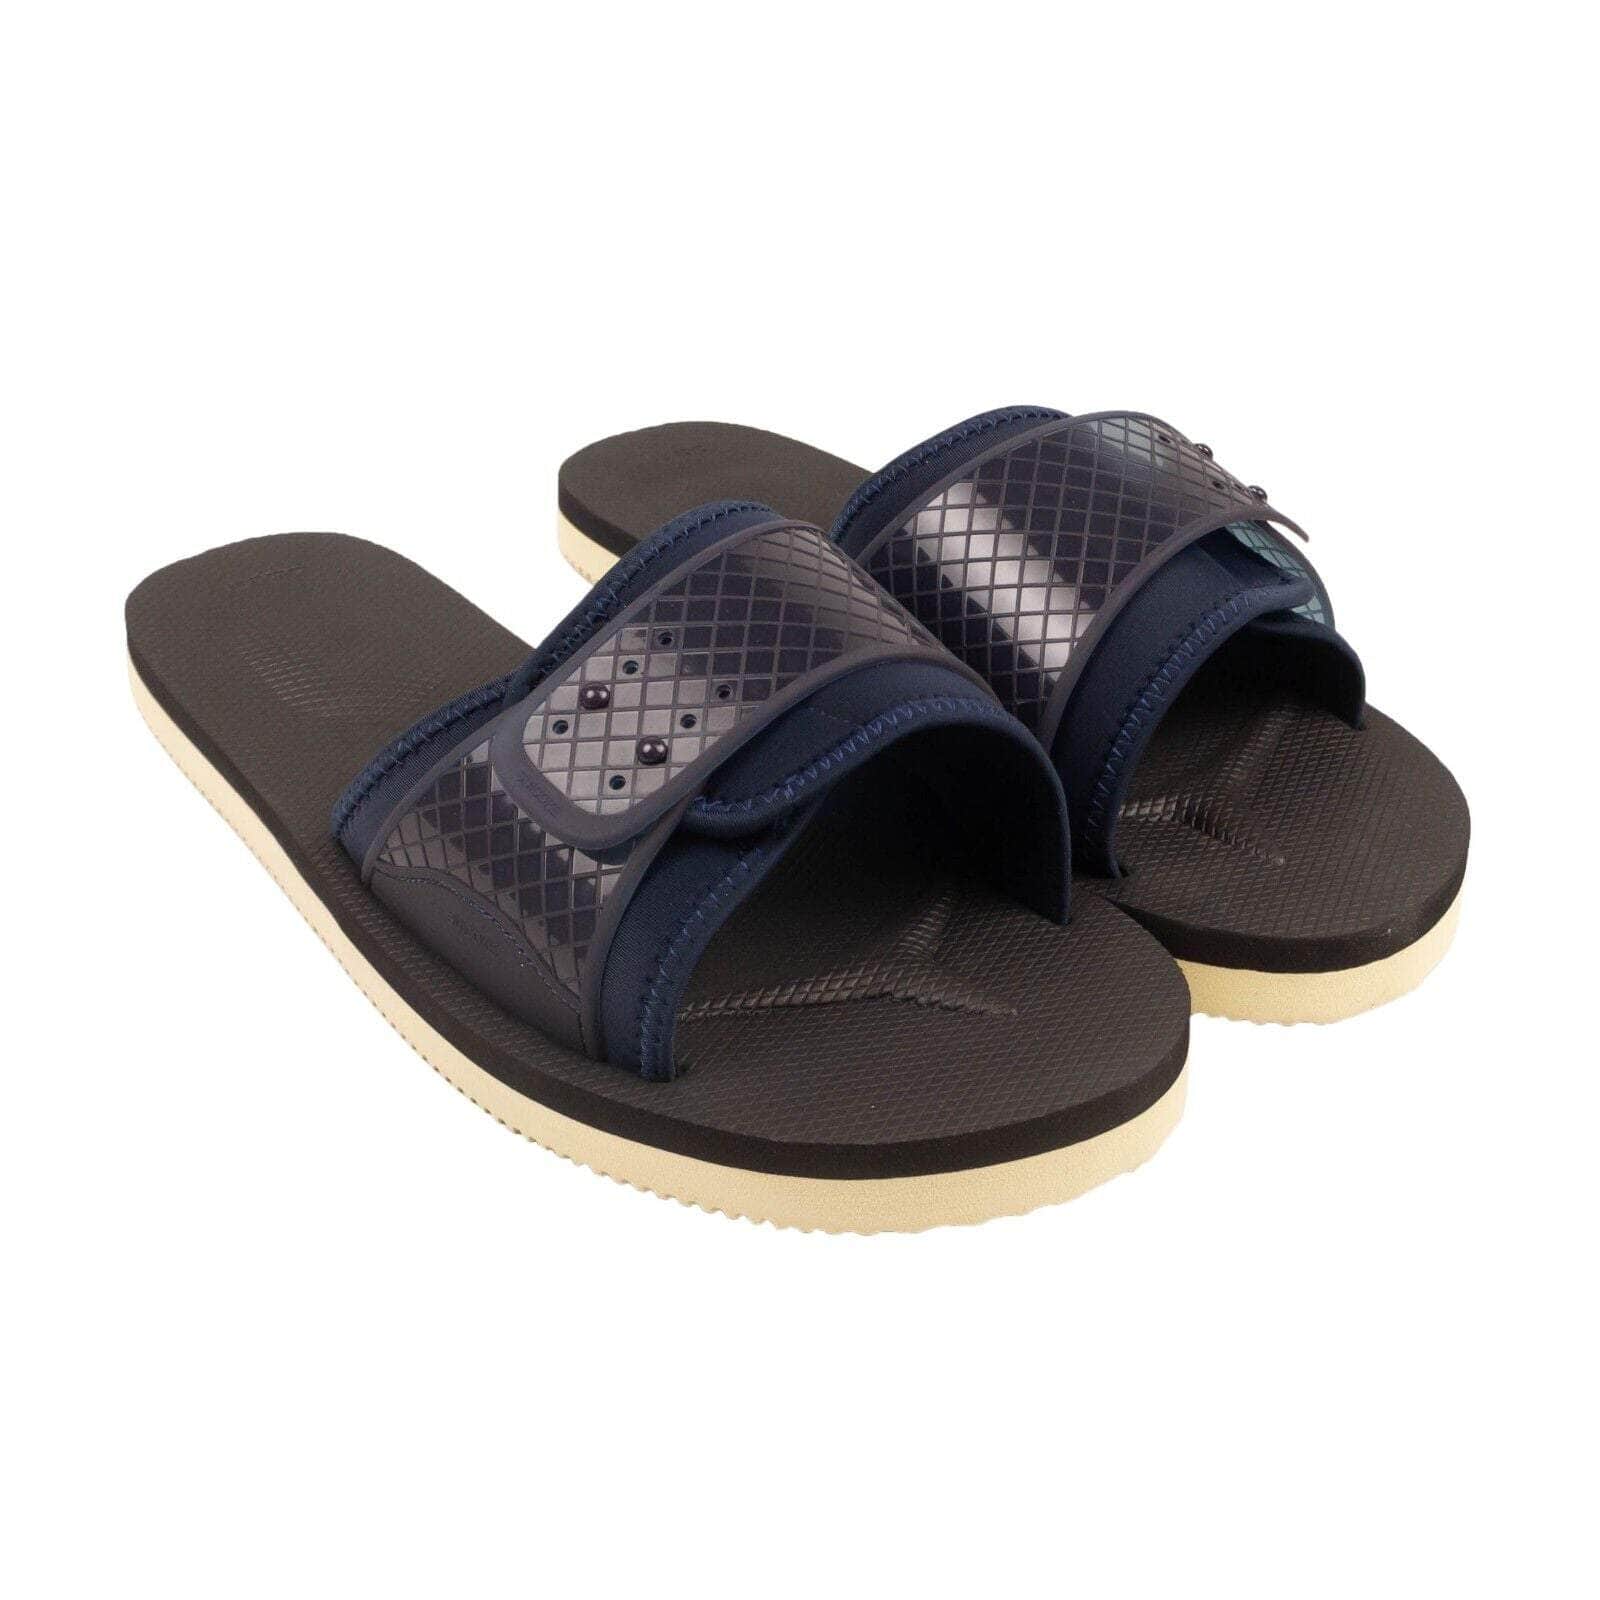 Suicoke channelenable-all, chicmi, couponcollection, gender-mens, main-shoes, mens-shoes, mens-slides-slippers, size-10, size-11, size-12, size-6, size-8, suicoke, under-250 Navy Blue SIV Slides